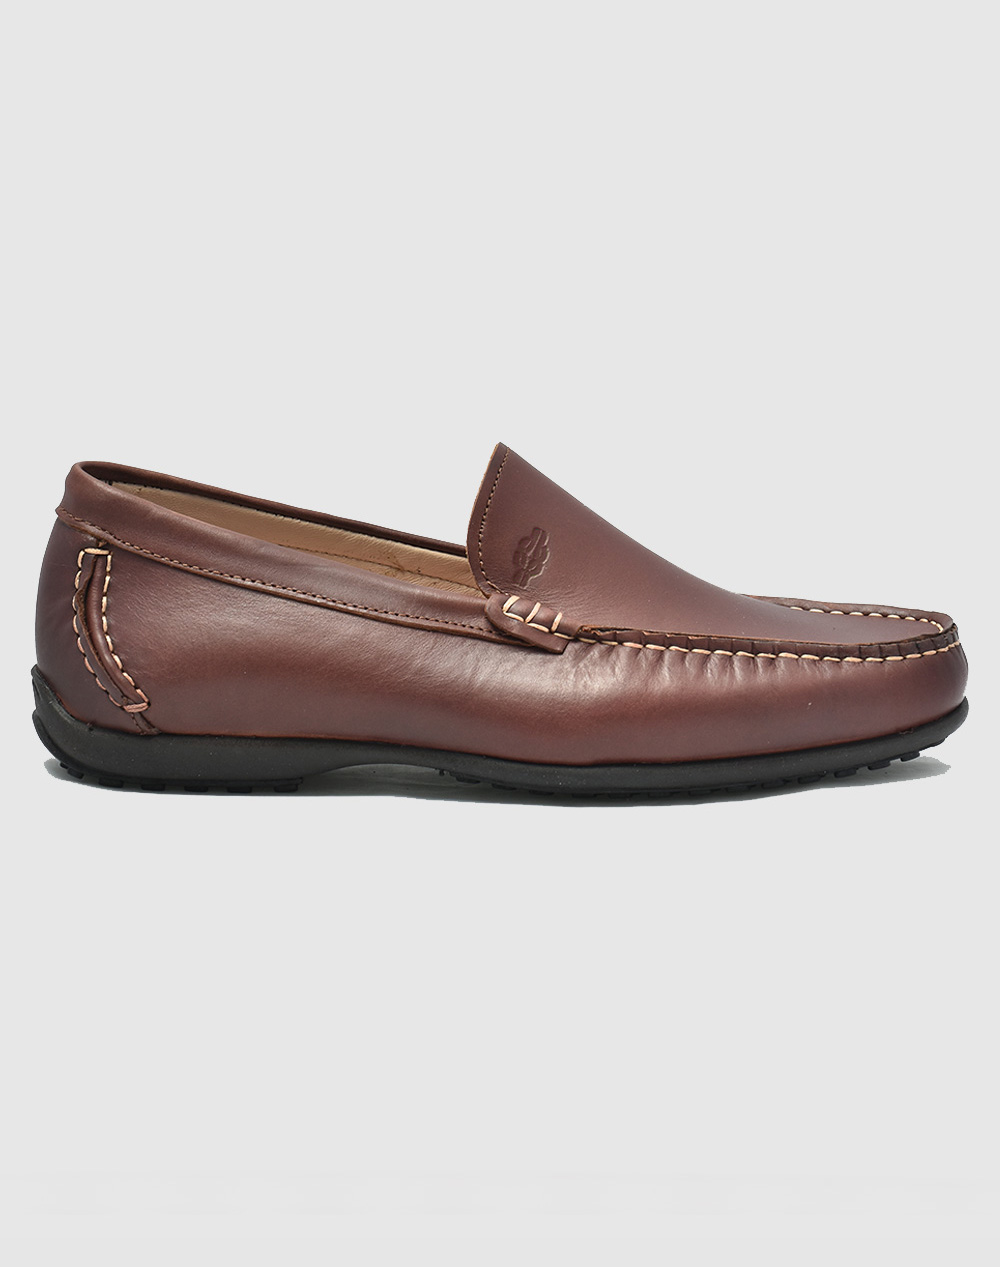 CHICAGO SHOES 124-5.0947-2085-TABAC Brown 3820PCHIC6000005_TABAC